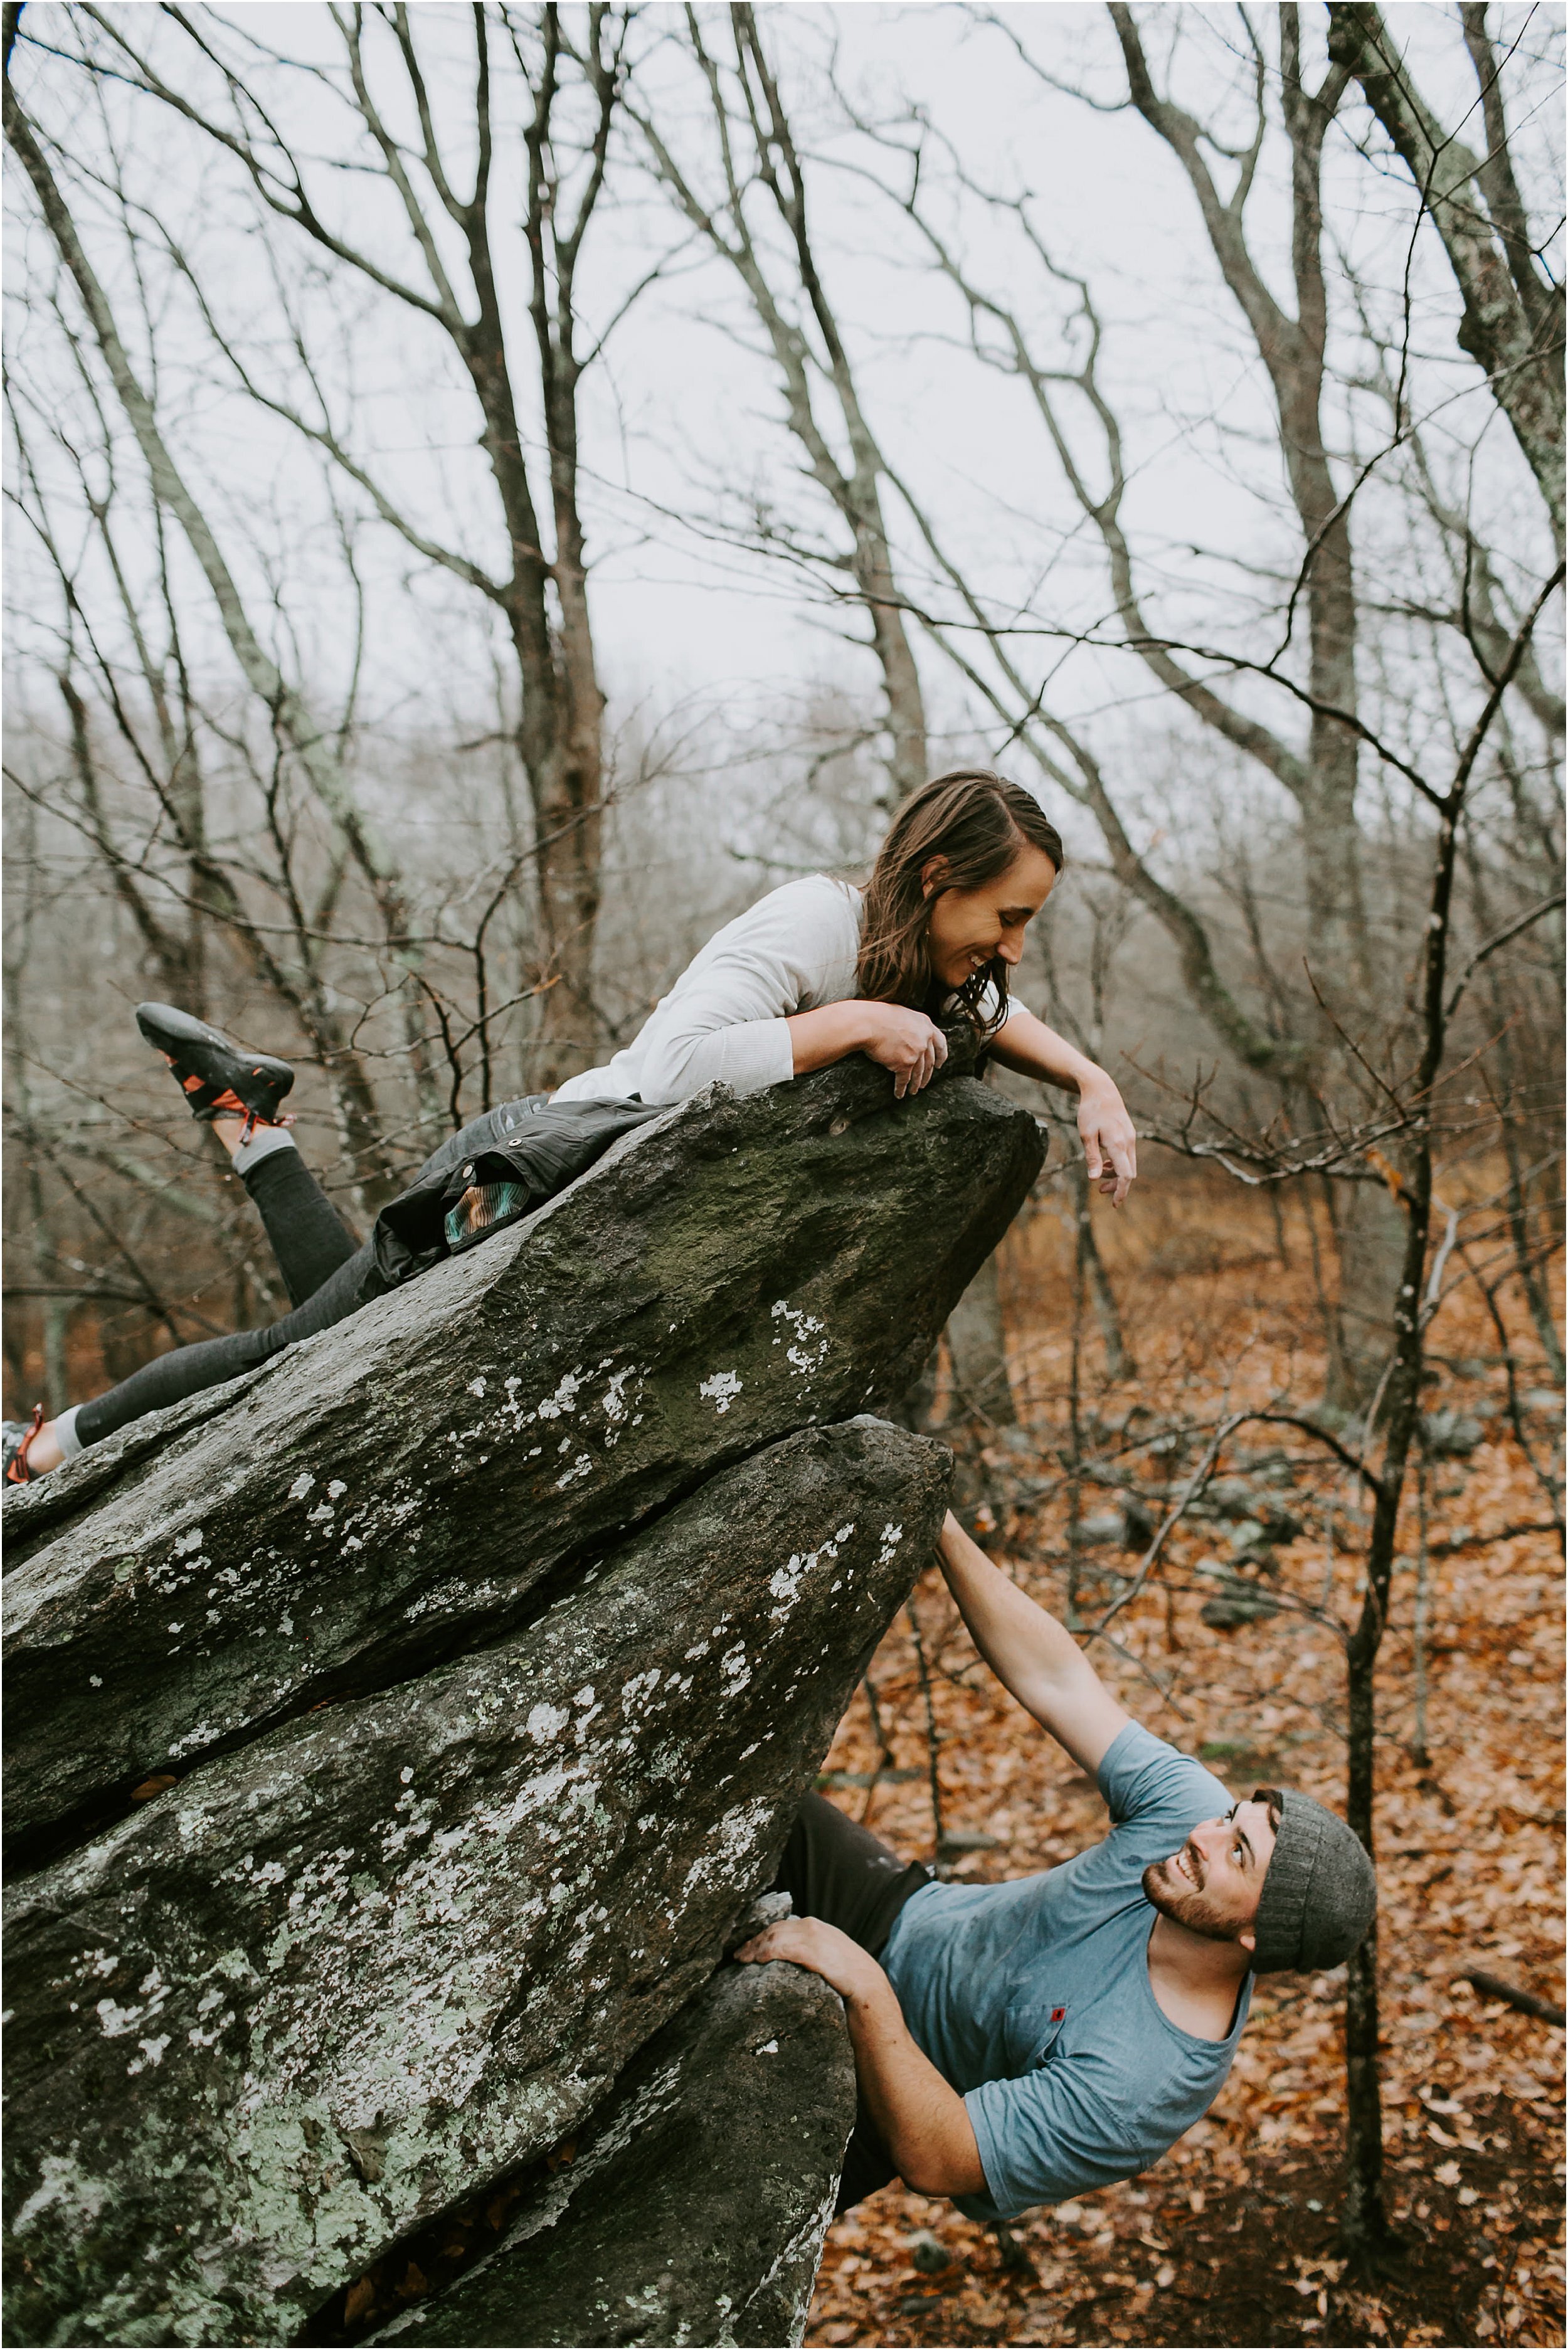  A couple is rock climbing. The girl is lying on top of the rock peering over as her fiancé climbs up.  